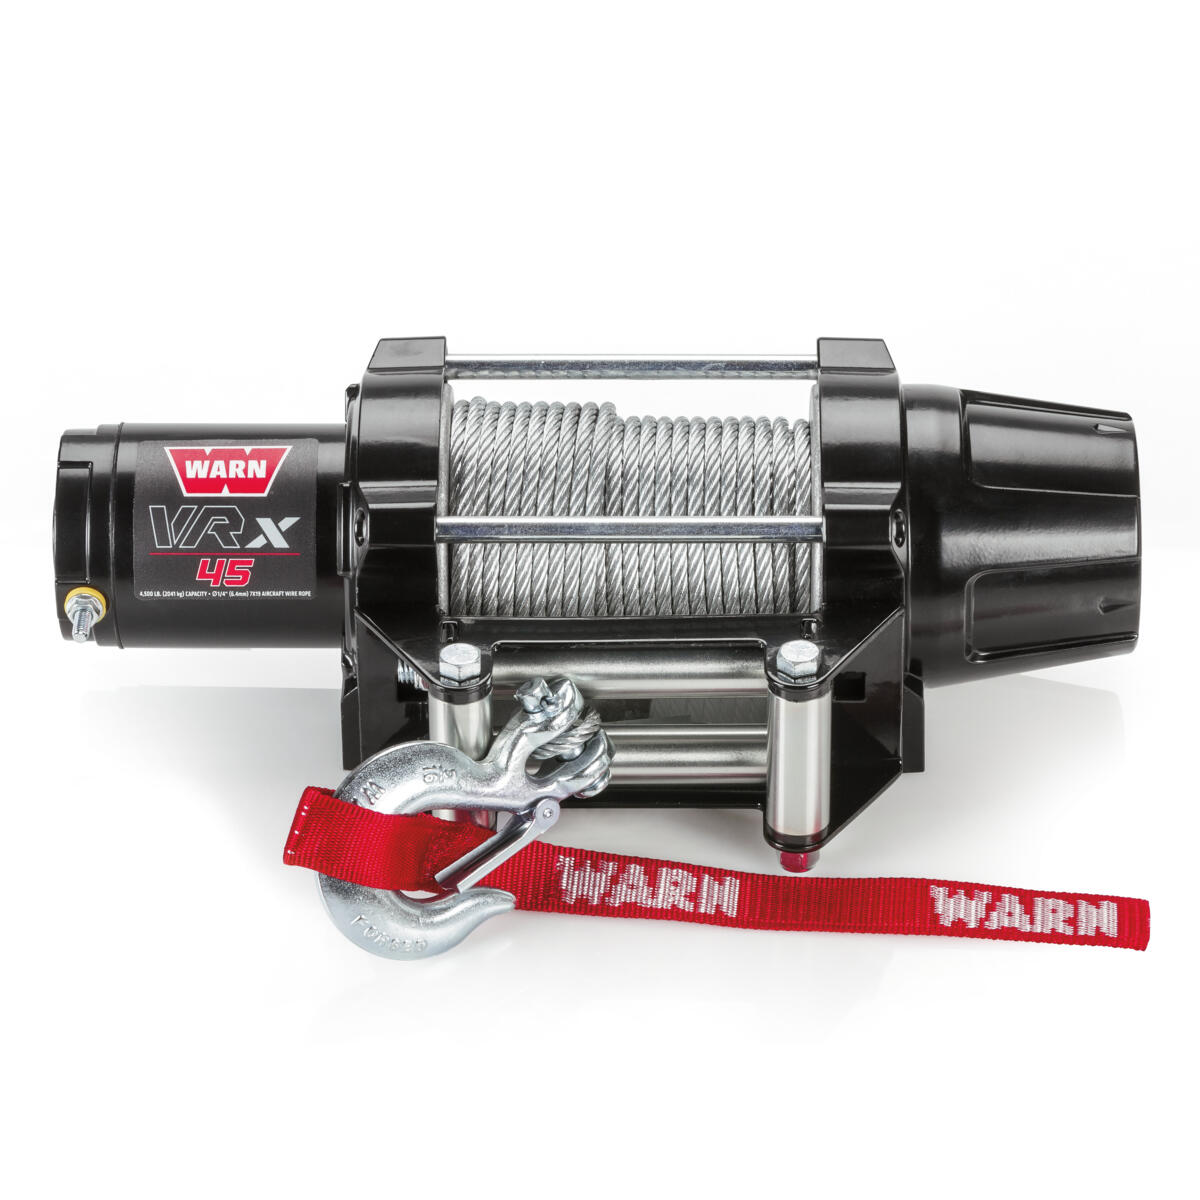 With its all-metal construction, the WARN® VRX Winch with 15,2 meter of wire rope includes the new clutch developed from the WARN® 4WD hub lock design.